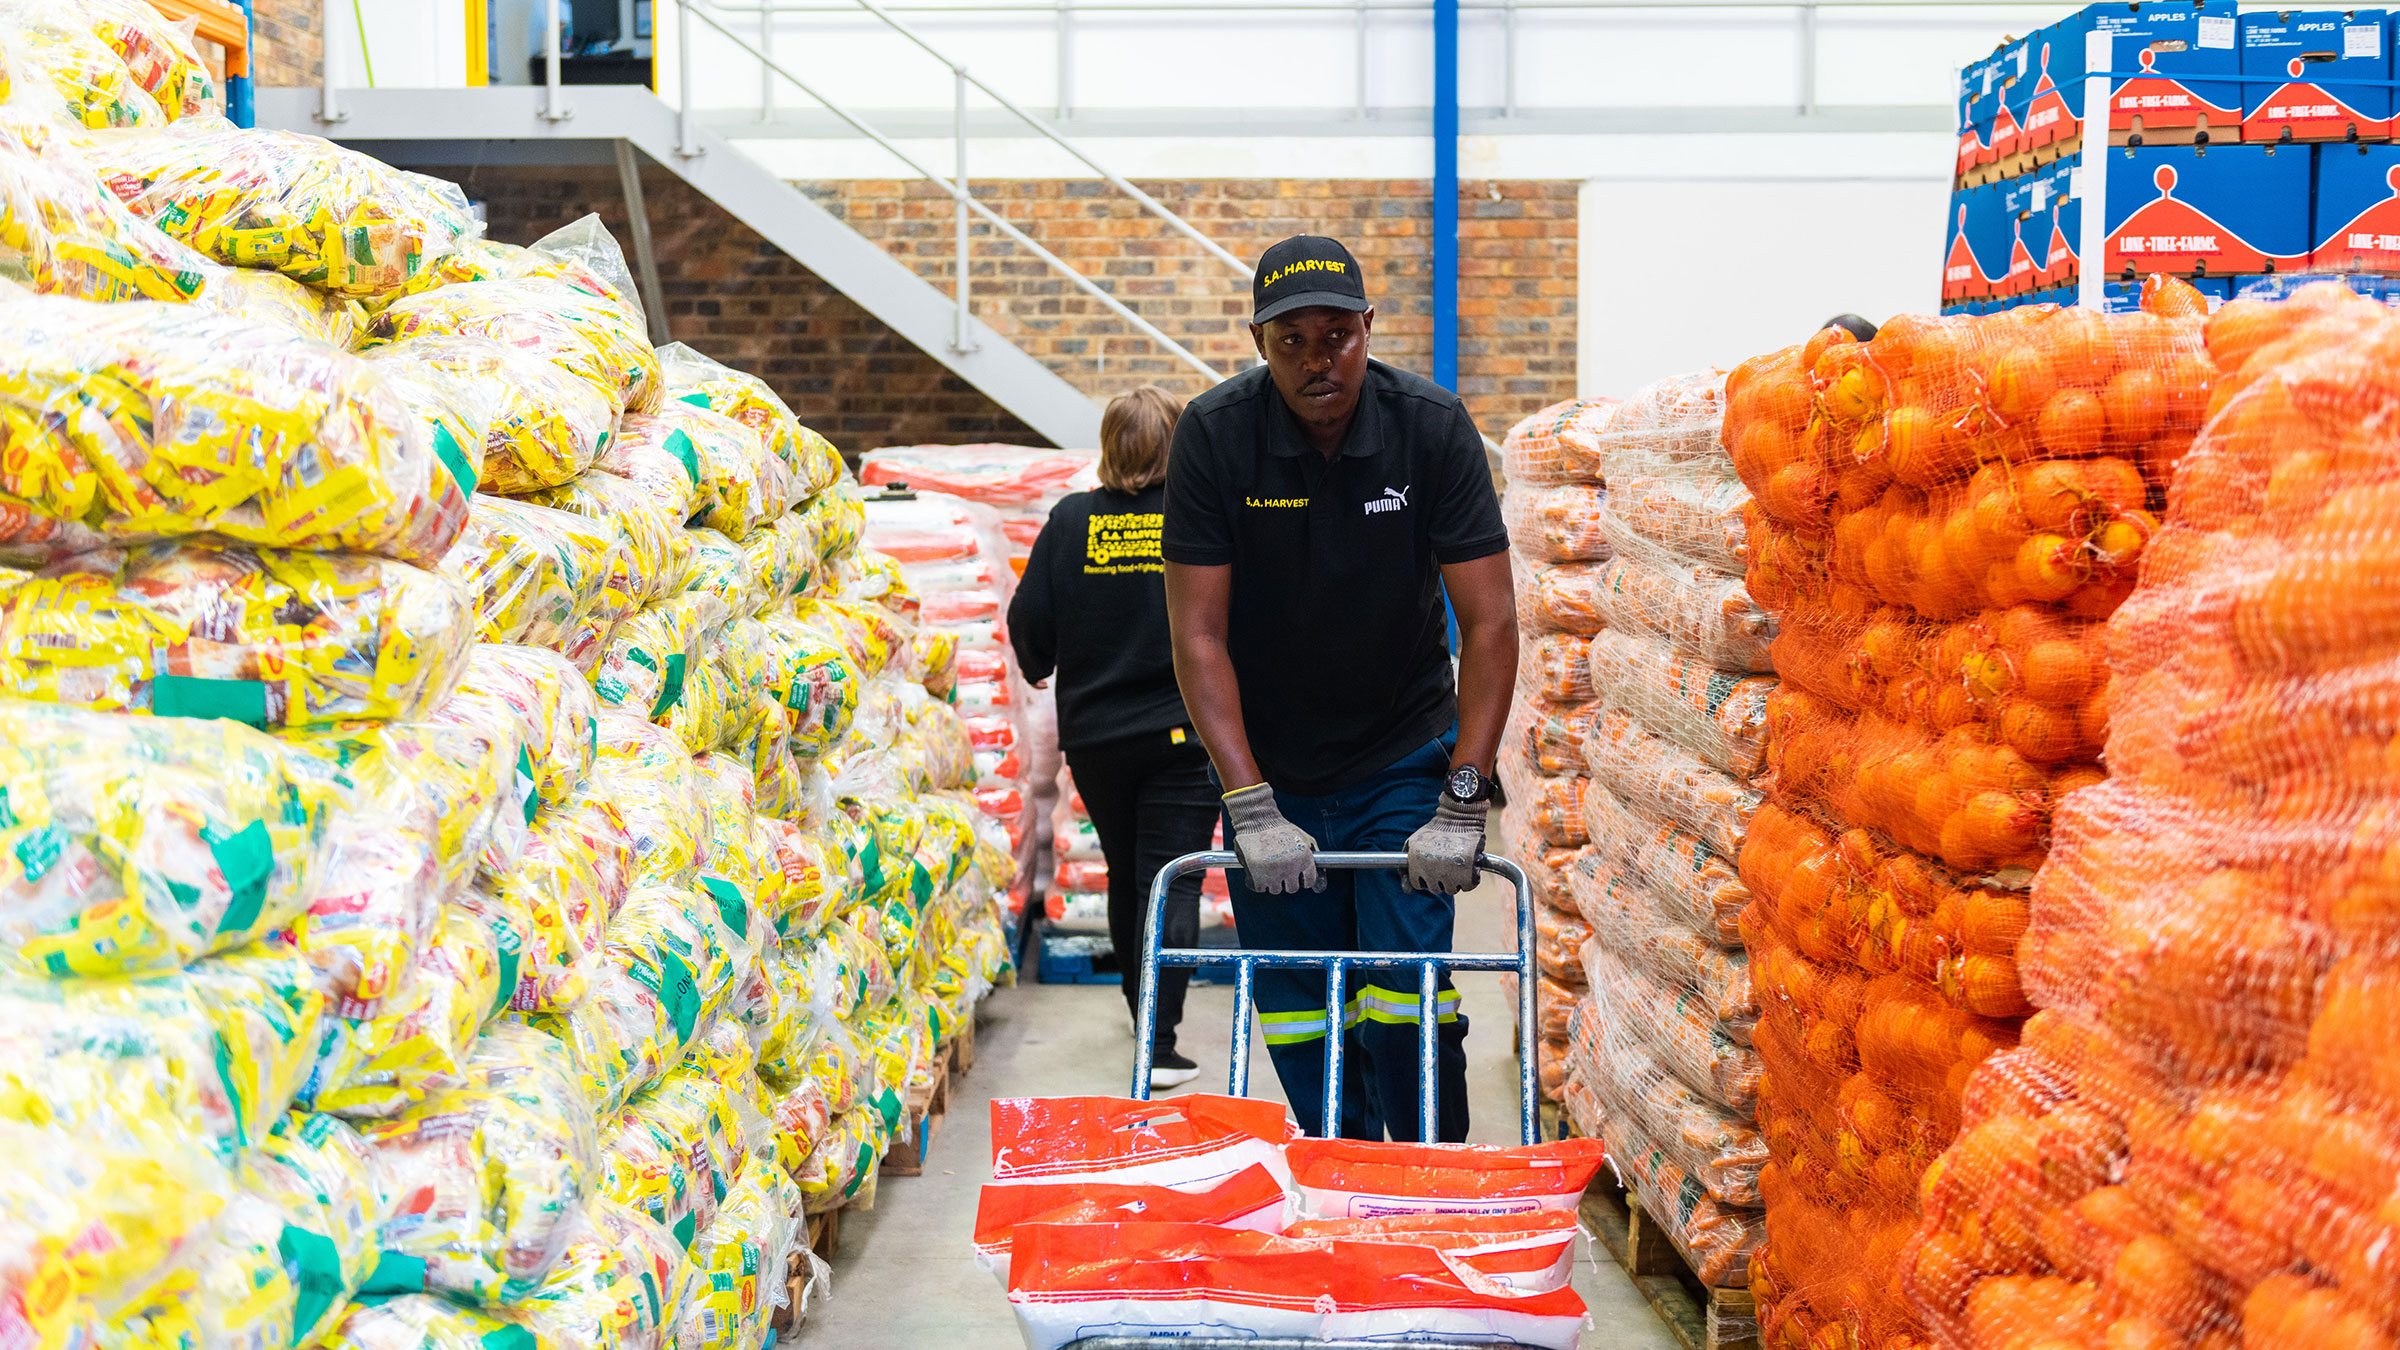 Reflections from South Africa II: Walking in the footsteps of Nelson Mandela, fighting hunger and food waste